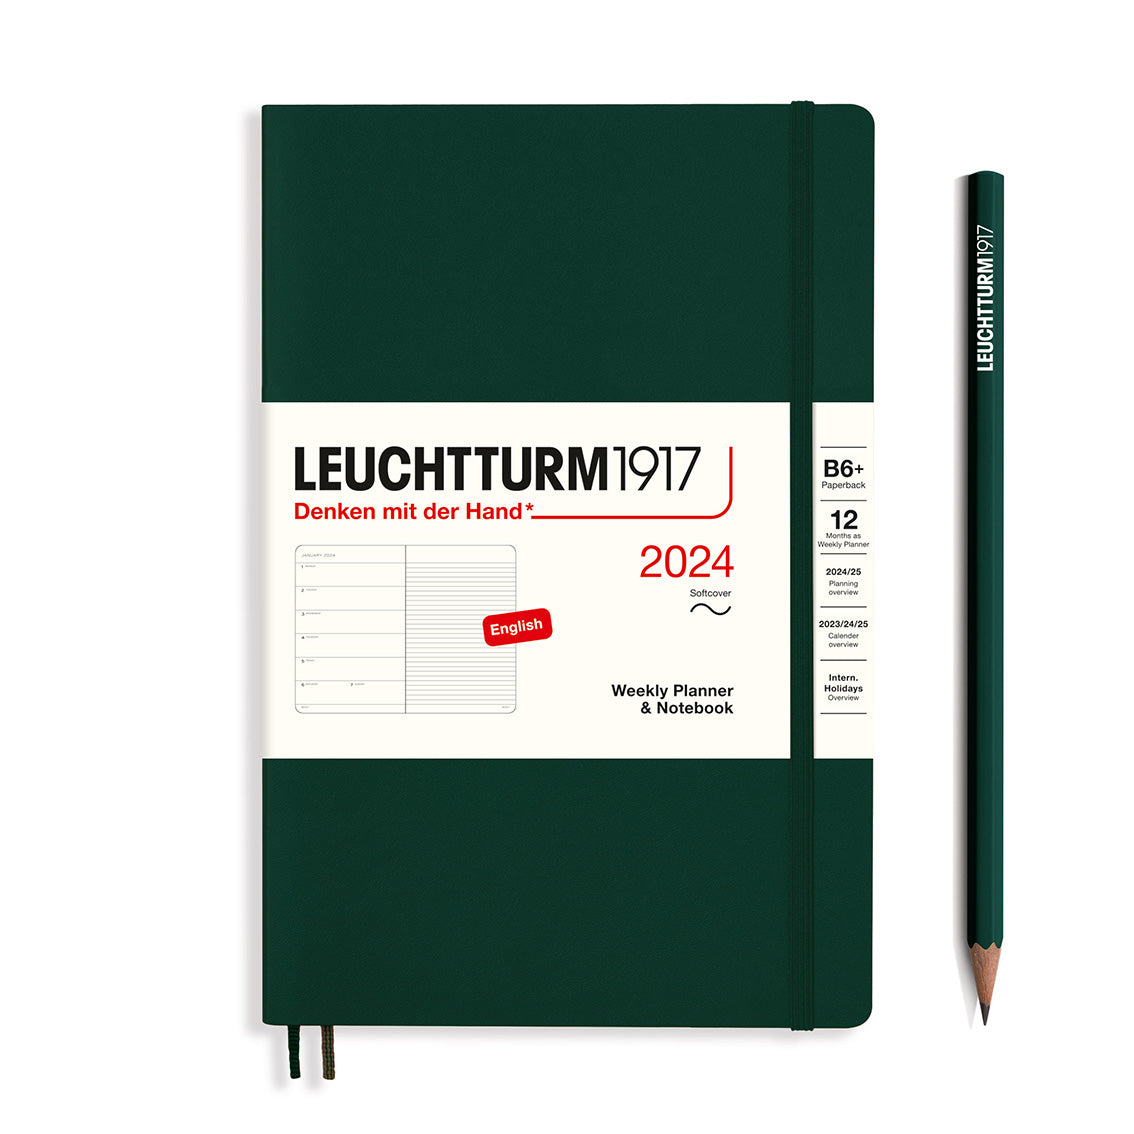 An image of a dark green planner with a dark green elastic band holding it together and a cream paper wrap around the middle stating the business name Leuchtturm1917, that it is for the year 2024, it is a weekly planner and notebook, is B6+ in size and an English language version. It has an image on the wrap showing the inside layout which is a week on the left hand page and a notes page on thr right hand page. A dark green pencil is shown at the side of the planner.